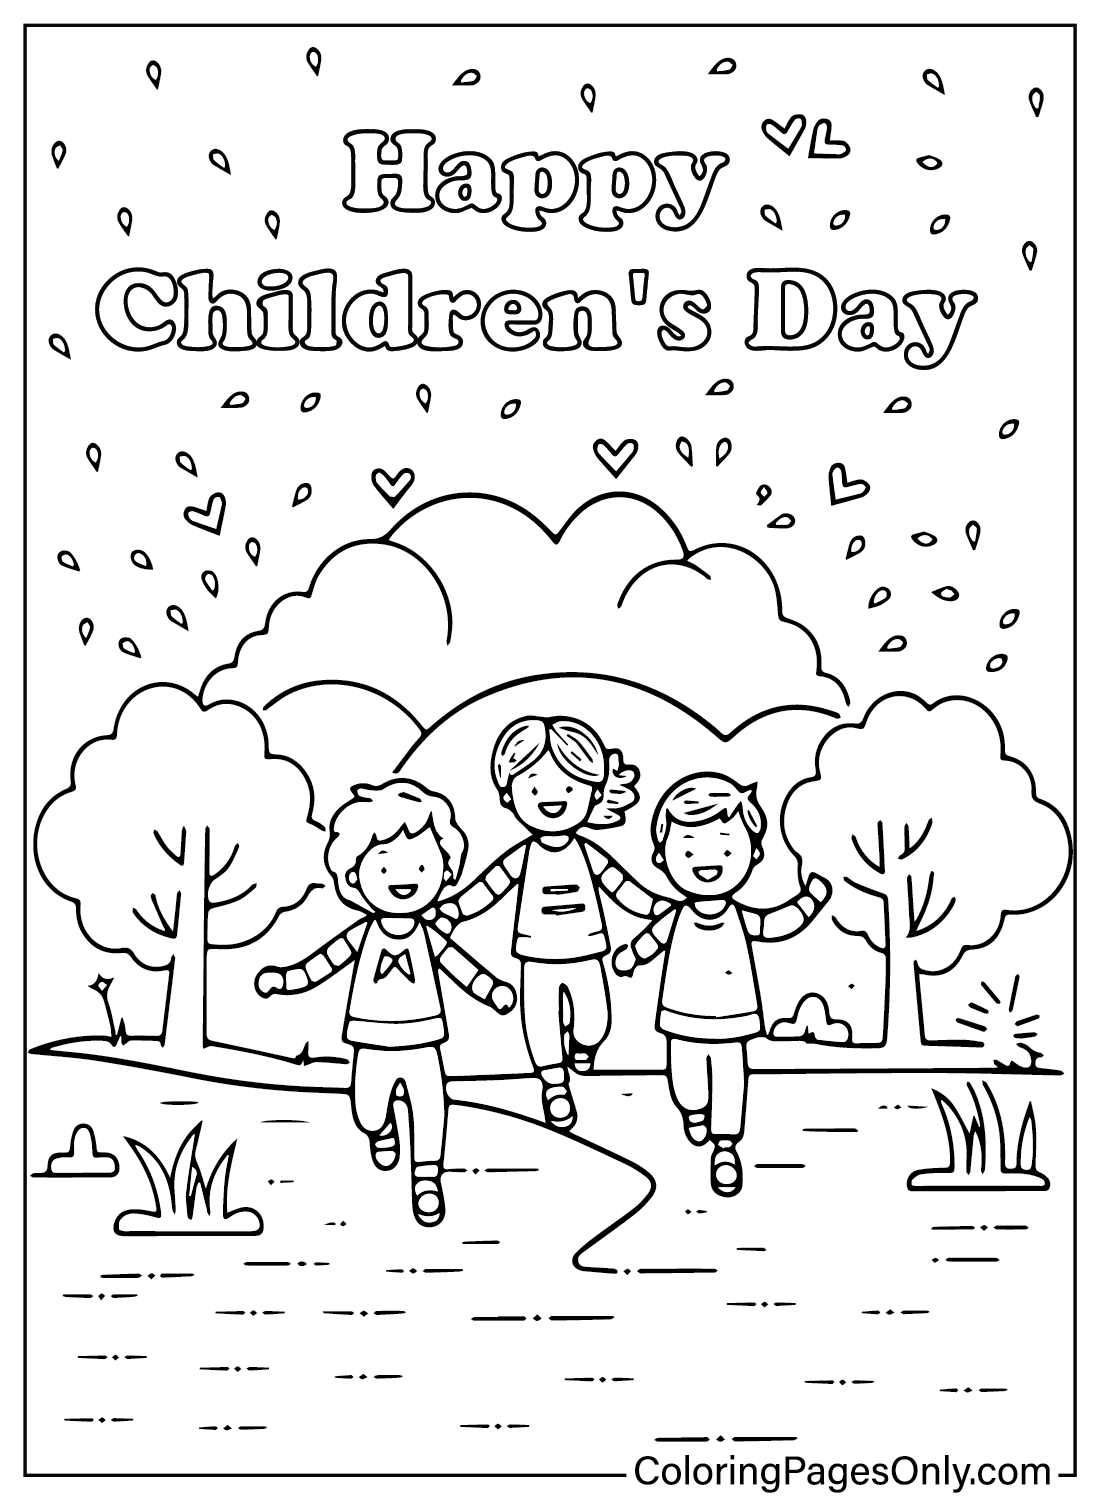 Children’s Day Coloring Page